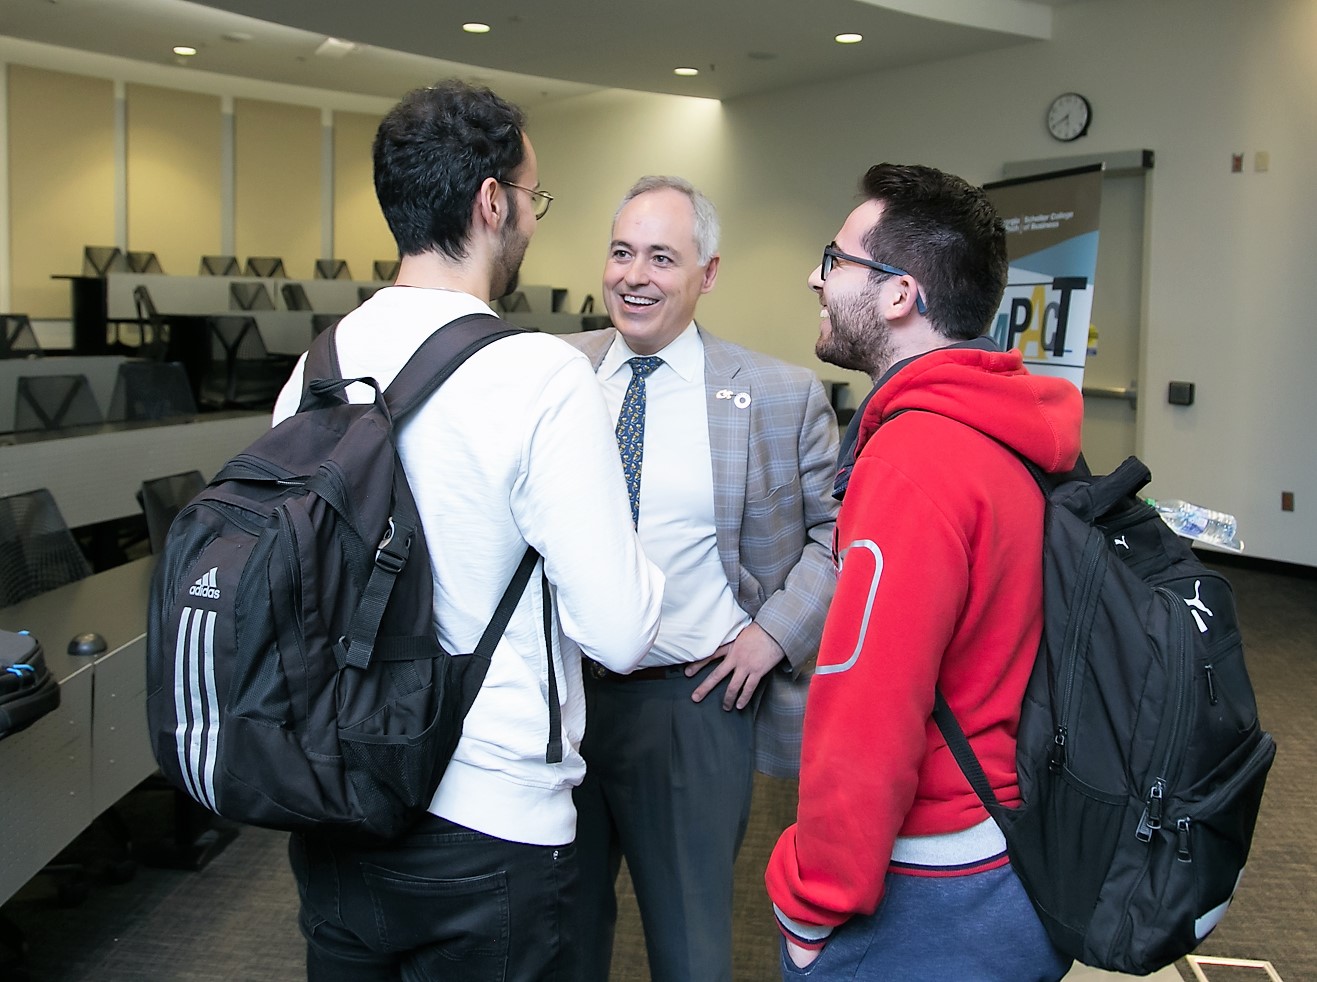 President Cabrera talks to students after his presentation